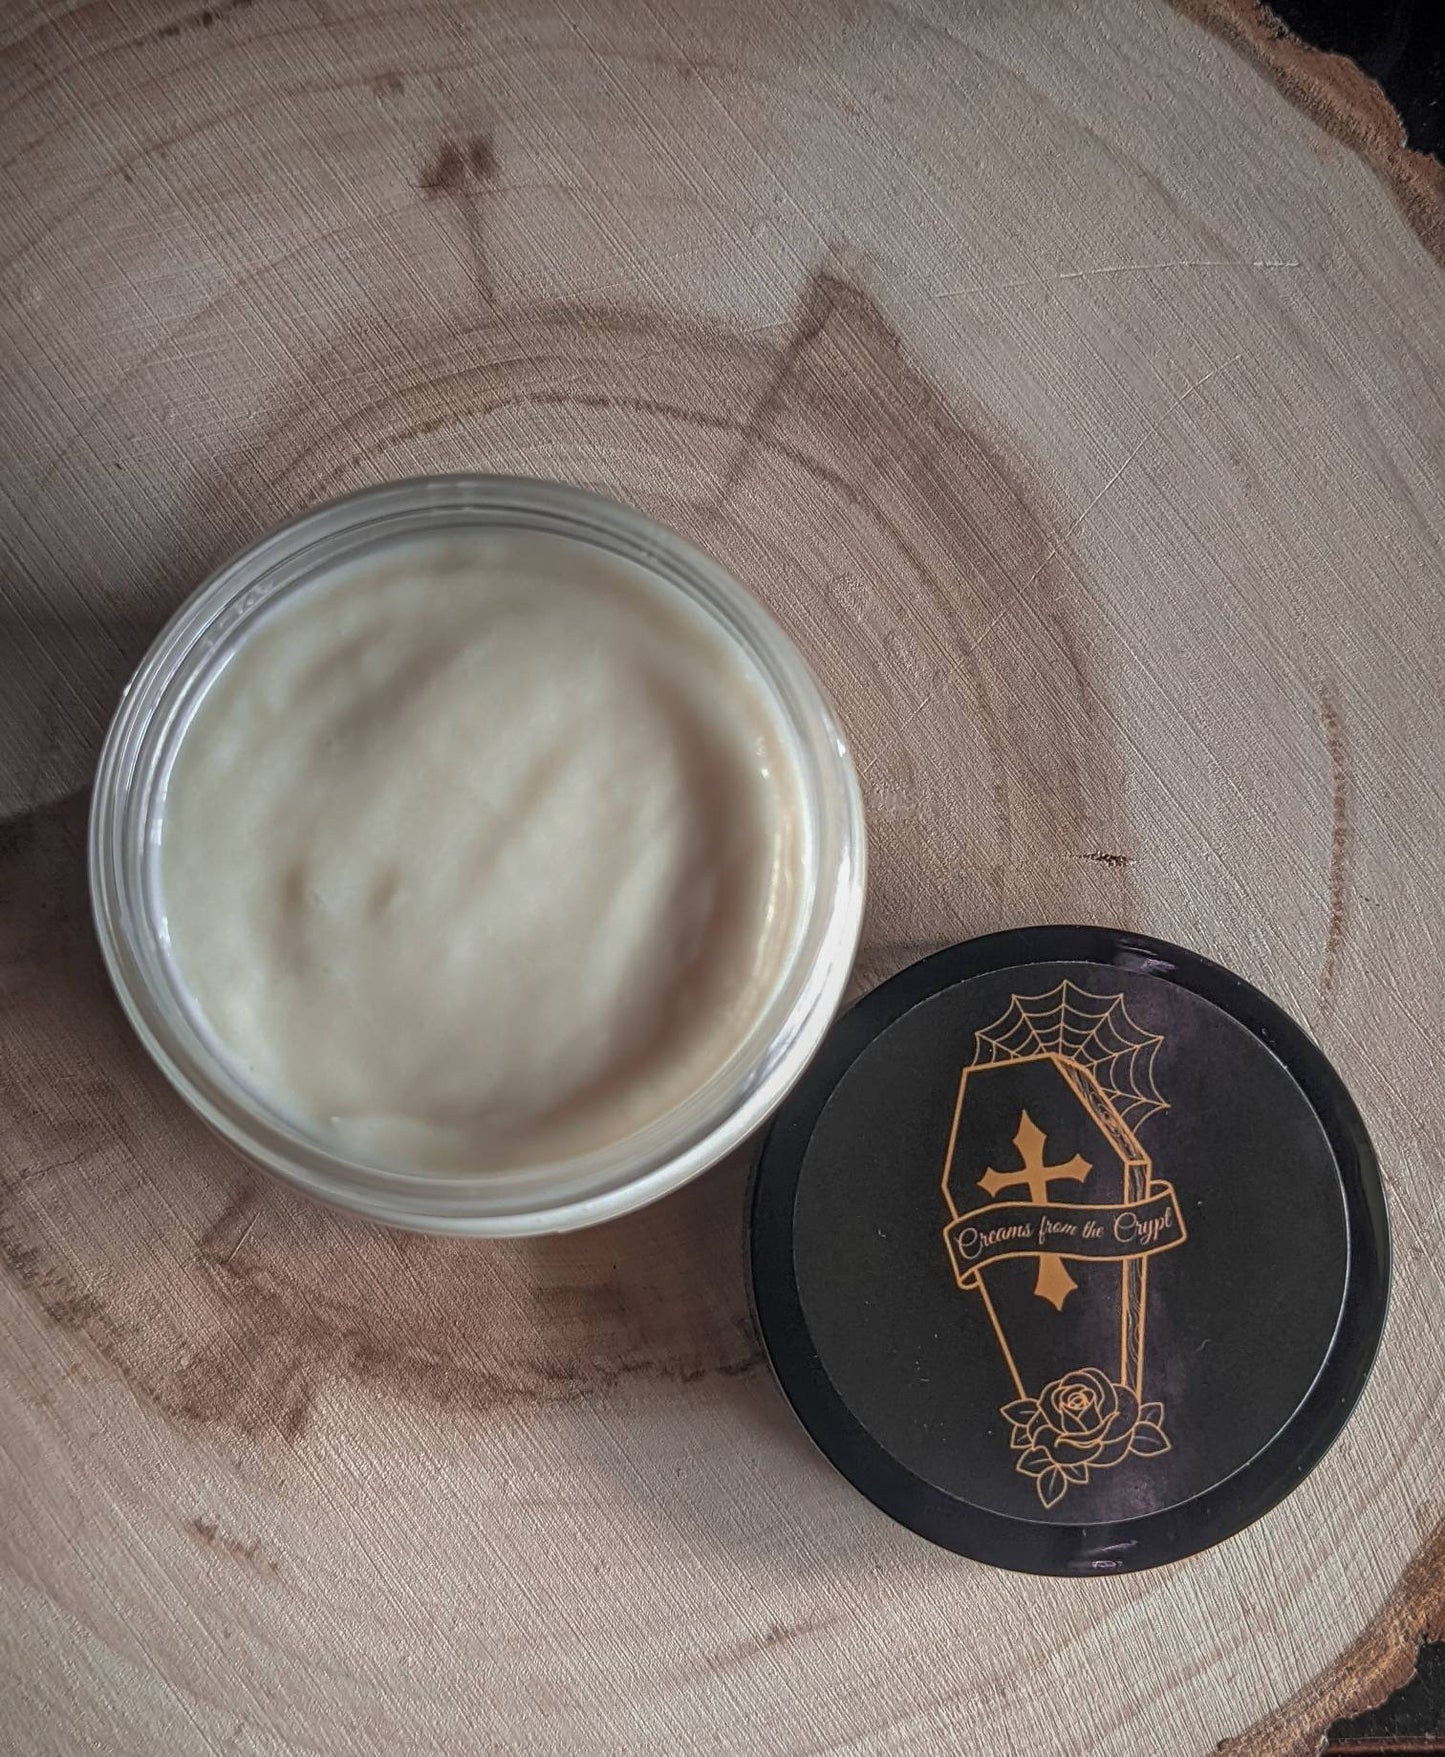 IMMORTALITY - Oak and Amber scented, Vegan whipped body butter, Shea butter, mango butter, gothic skincare, unisex fragrance, gifts for him